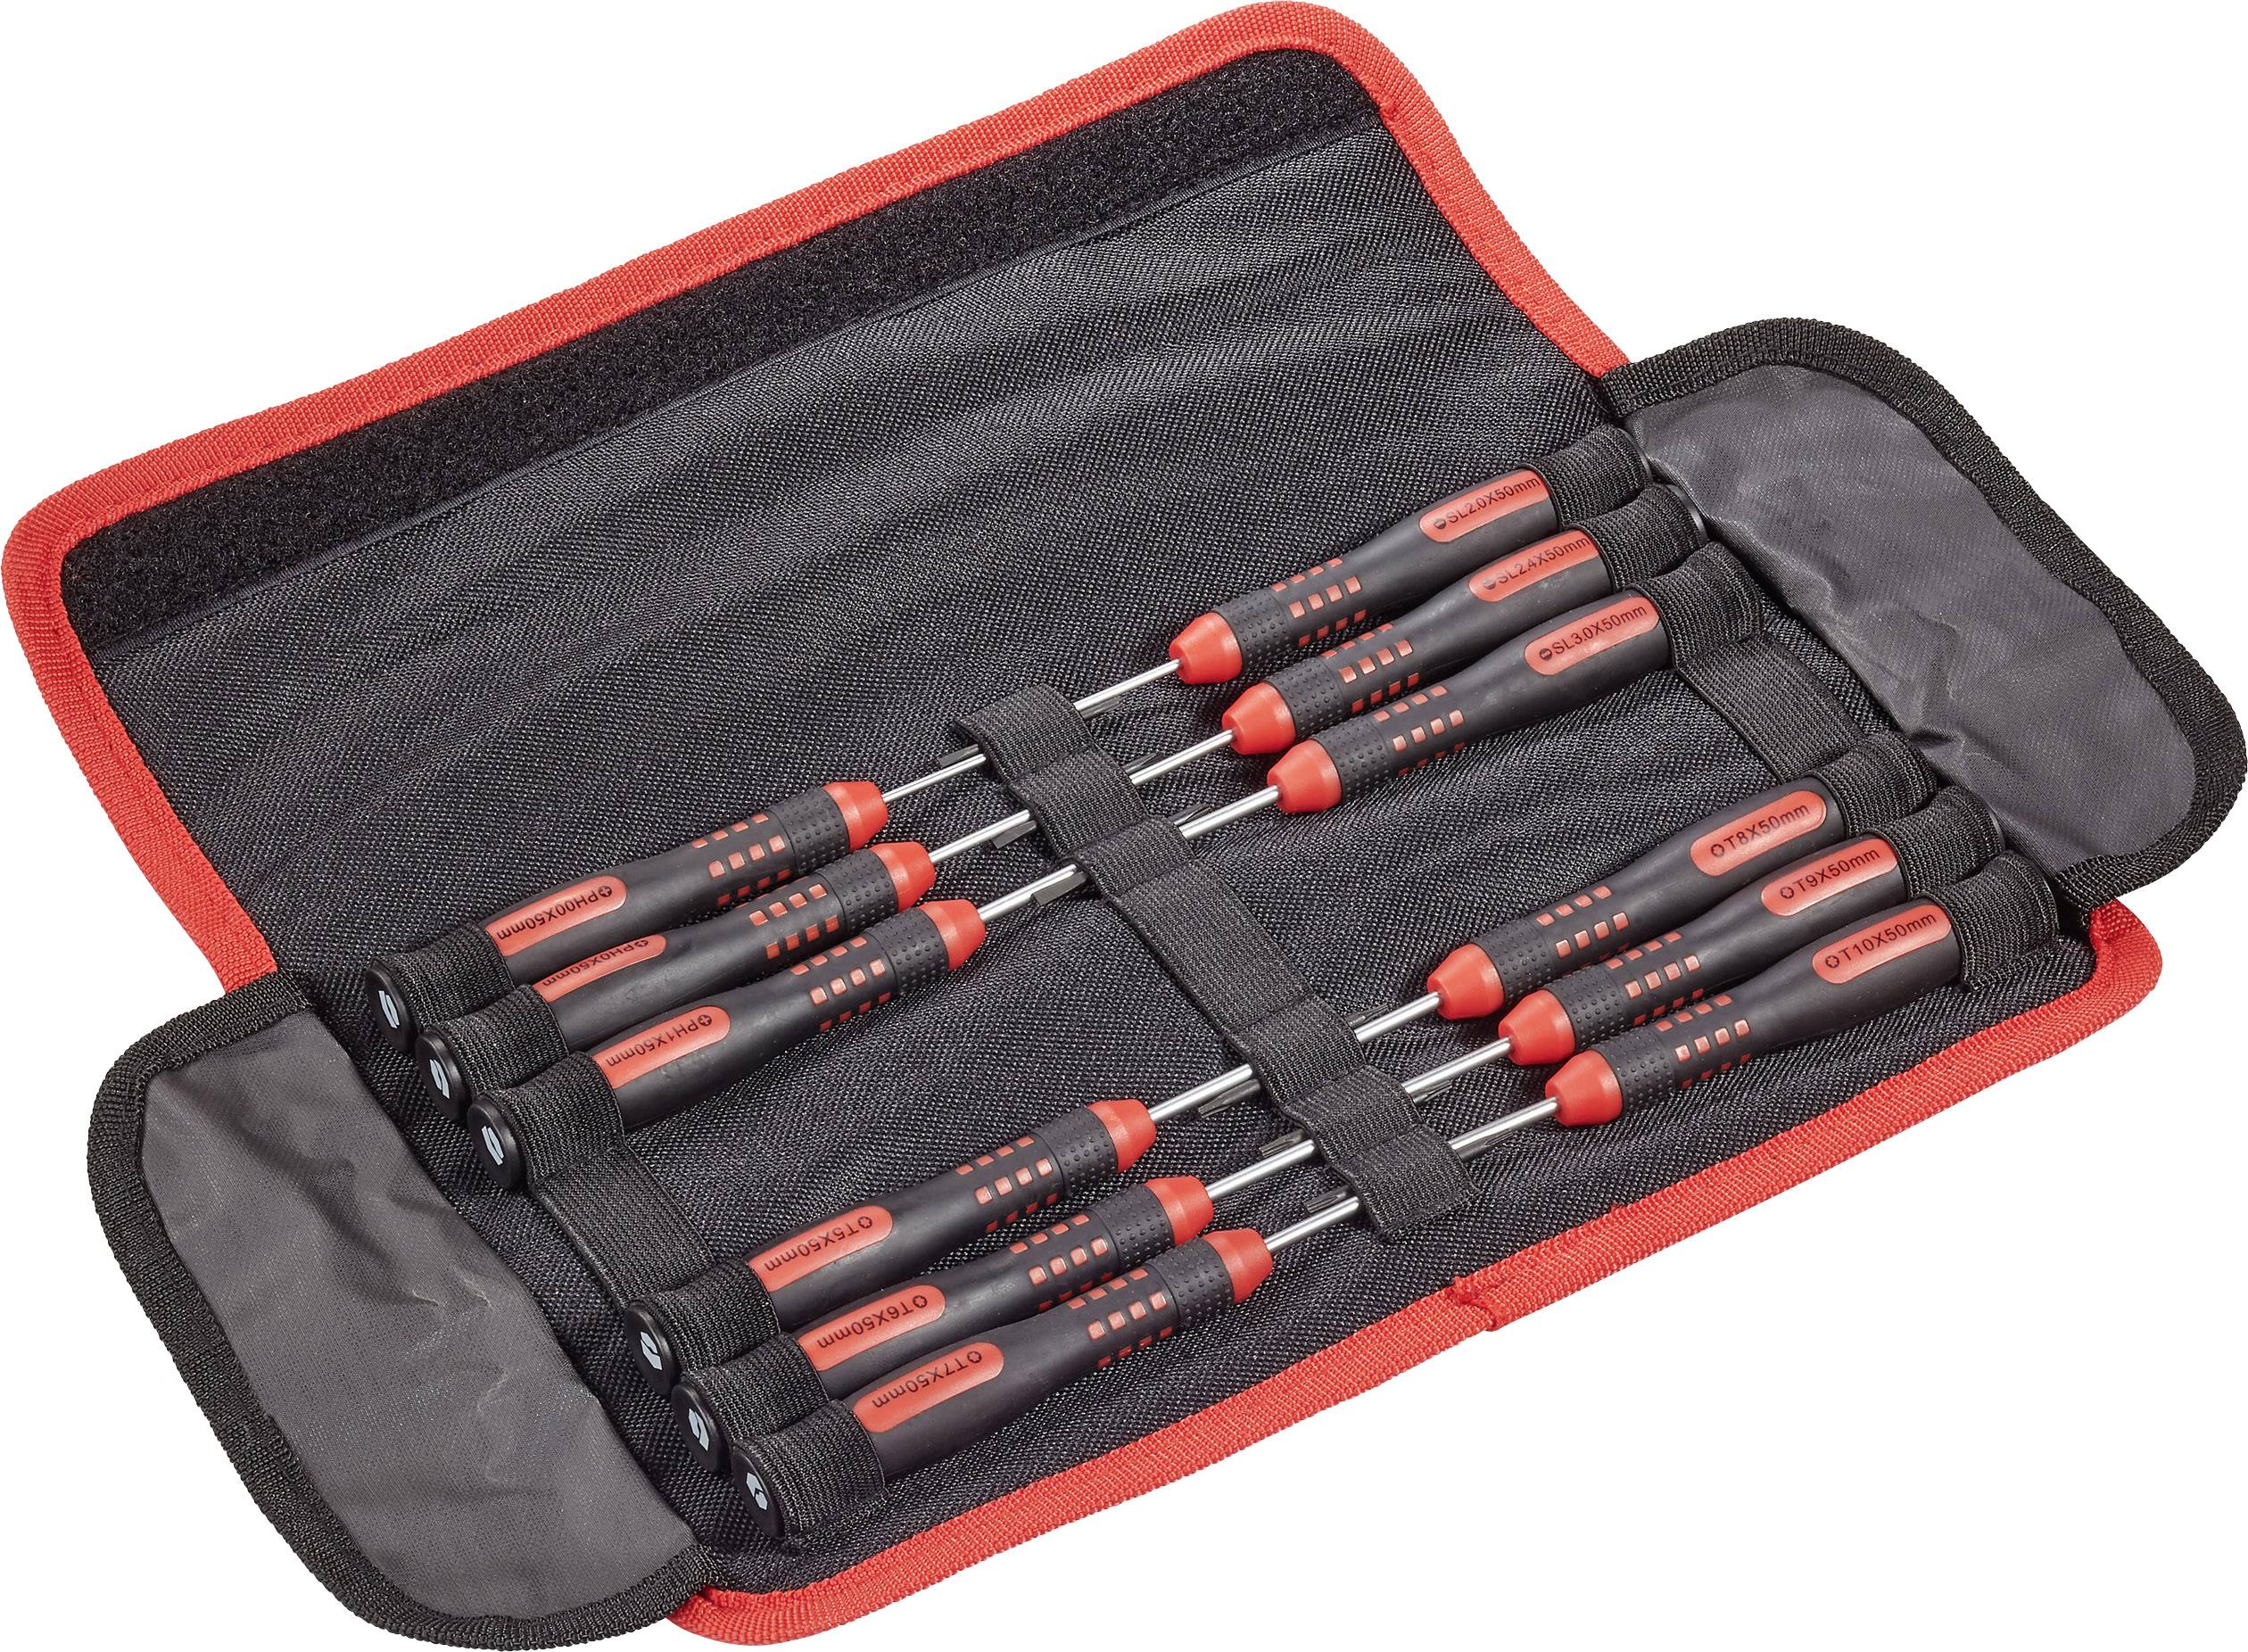 Peixiang Smoothly Set of Special Steel Screwdrivers Set Screwdriver and Socket Screwdrivers 12 Pieces Ideal 